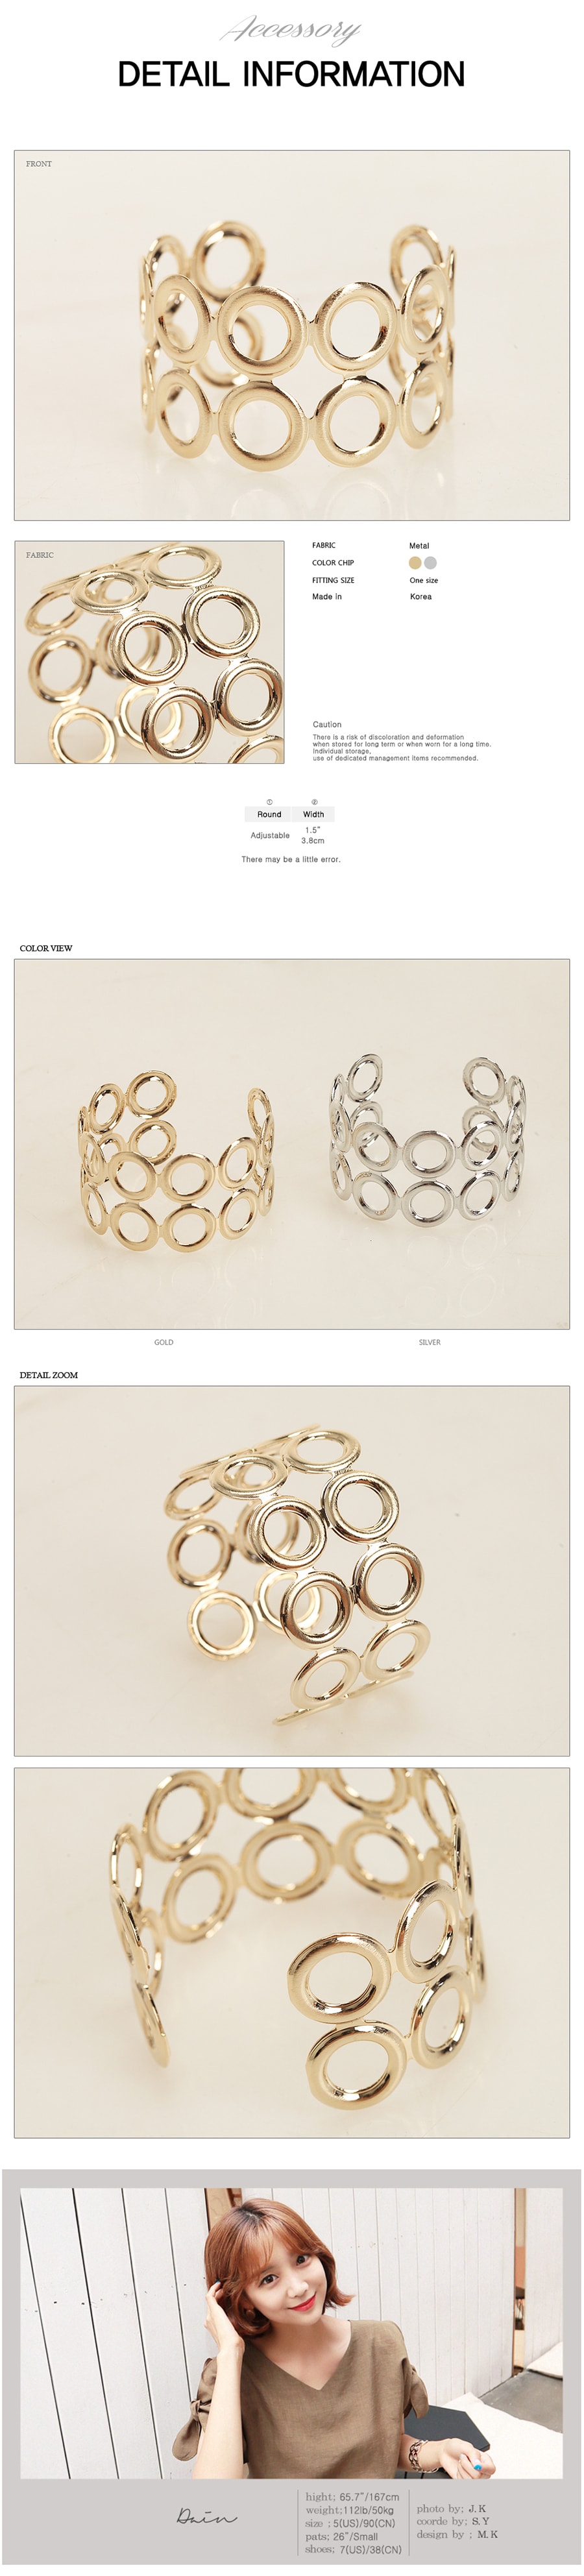 KOREA Stainless Steel 88-Shaped Cuff Bangle Bracelet #Silver [Free Shipping]